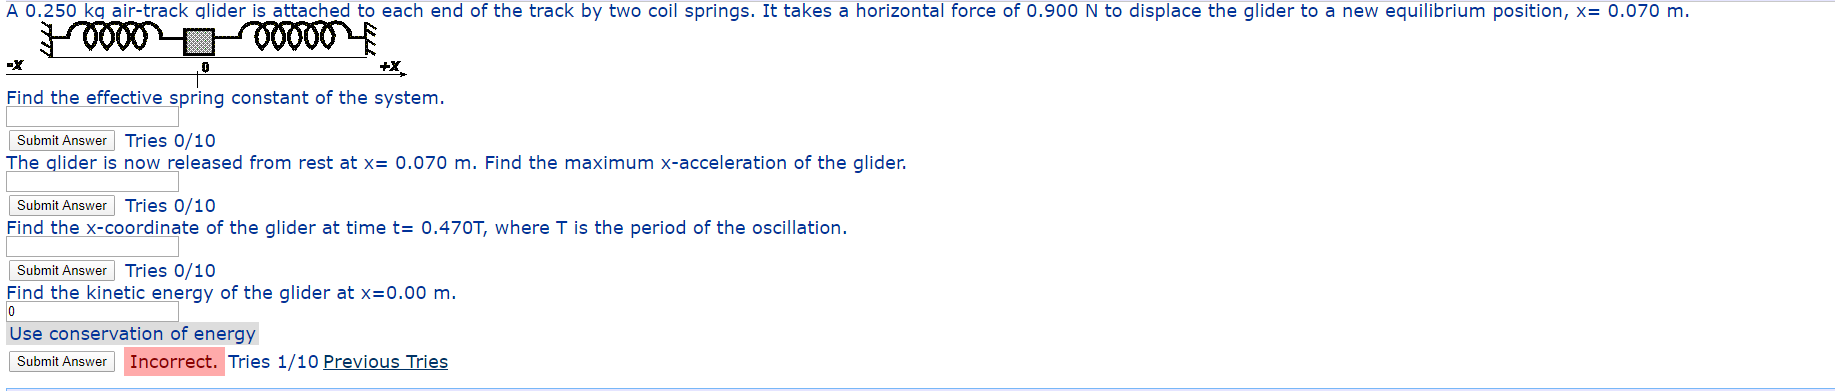 A 0.250 kg air-track glider is attached to each end of the track by two coil springs. It takes a horizontal force of 0.900 N to displace the glider to a new equilibrium position, x= 0.070 m.
+X
Find the effective spring constant of the system.
Submit Answer Tries 0/10
The glider is now released from rest at x= 0.070 m. Find the maximum x-acceleration of the glider.
Submit Answer Tries 0/10
Find the x-coordinate of the glider at time t= 0.470T, where T is the period of the oscillation.
Submit Answer Tries 0/10
Find the kinetic energy of the glider at x=0.00 m.
Use conservation of energy
Submit Answer
Incorrect. Tries 1/10 Previous Tries
